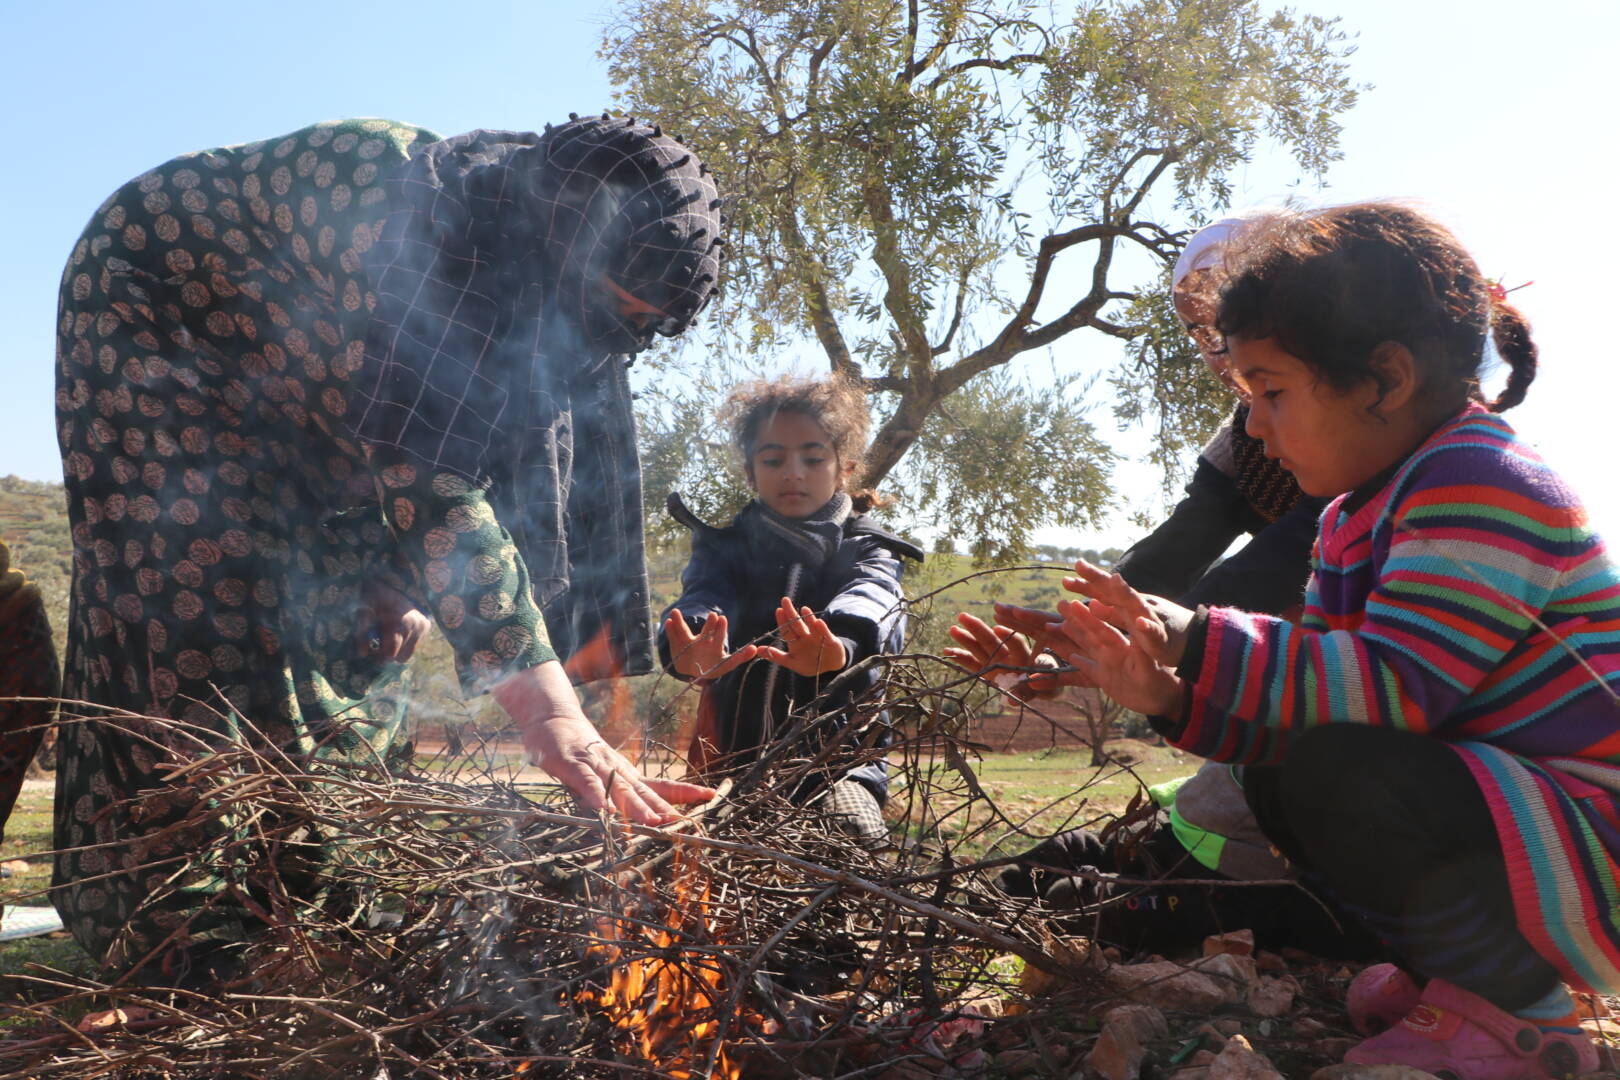 A mother bends down to press her hand on a pile of sticks to kindle a small fire. Three children sit by warming their hands.